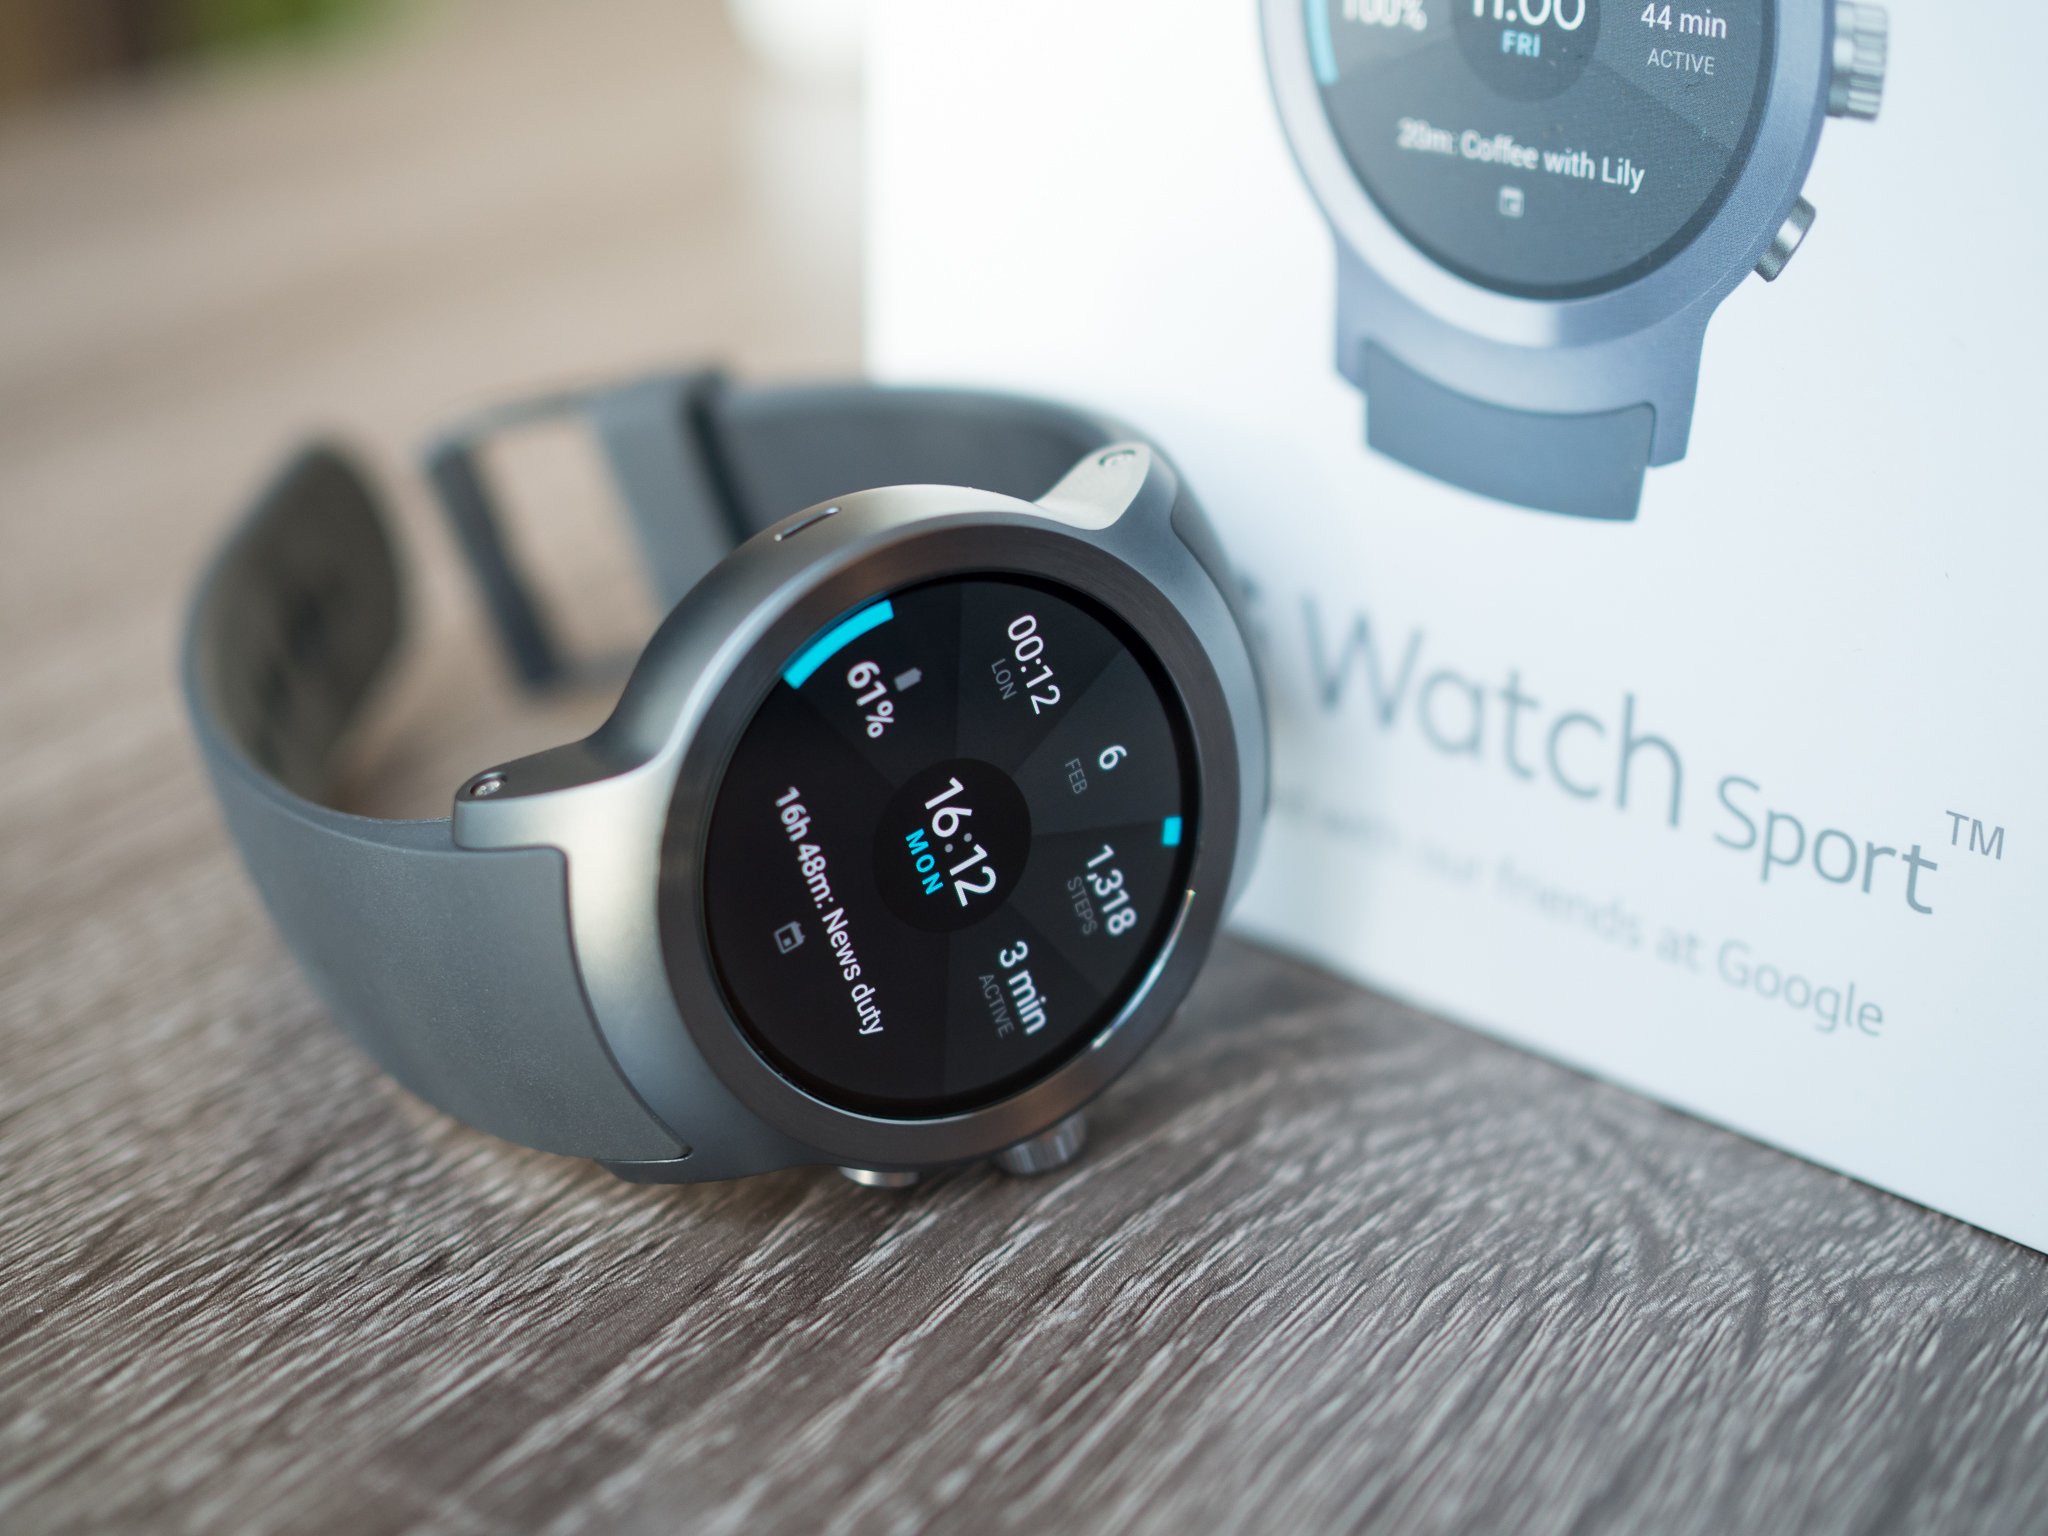 LG Watch Sport review: The best 